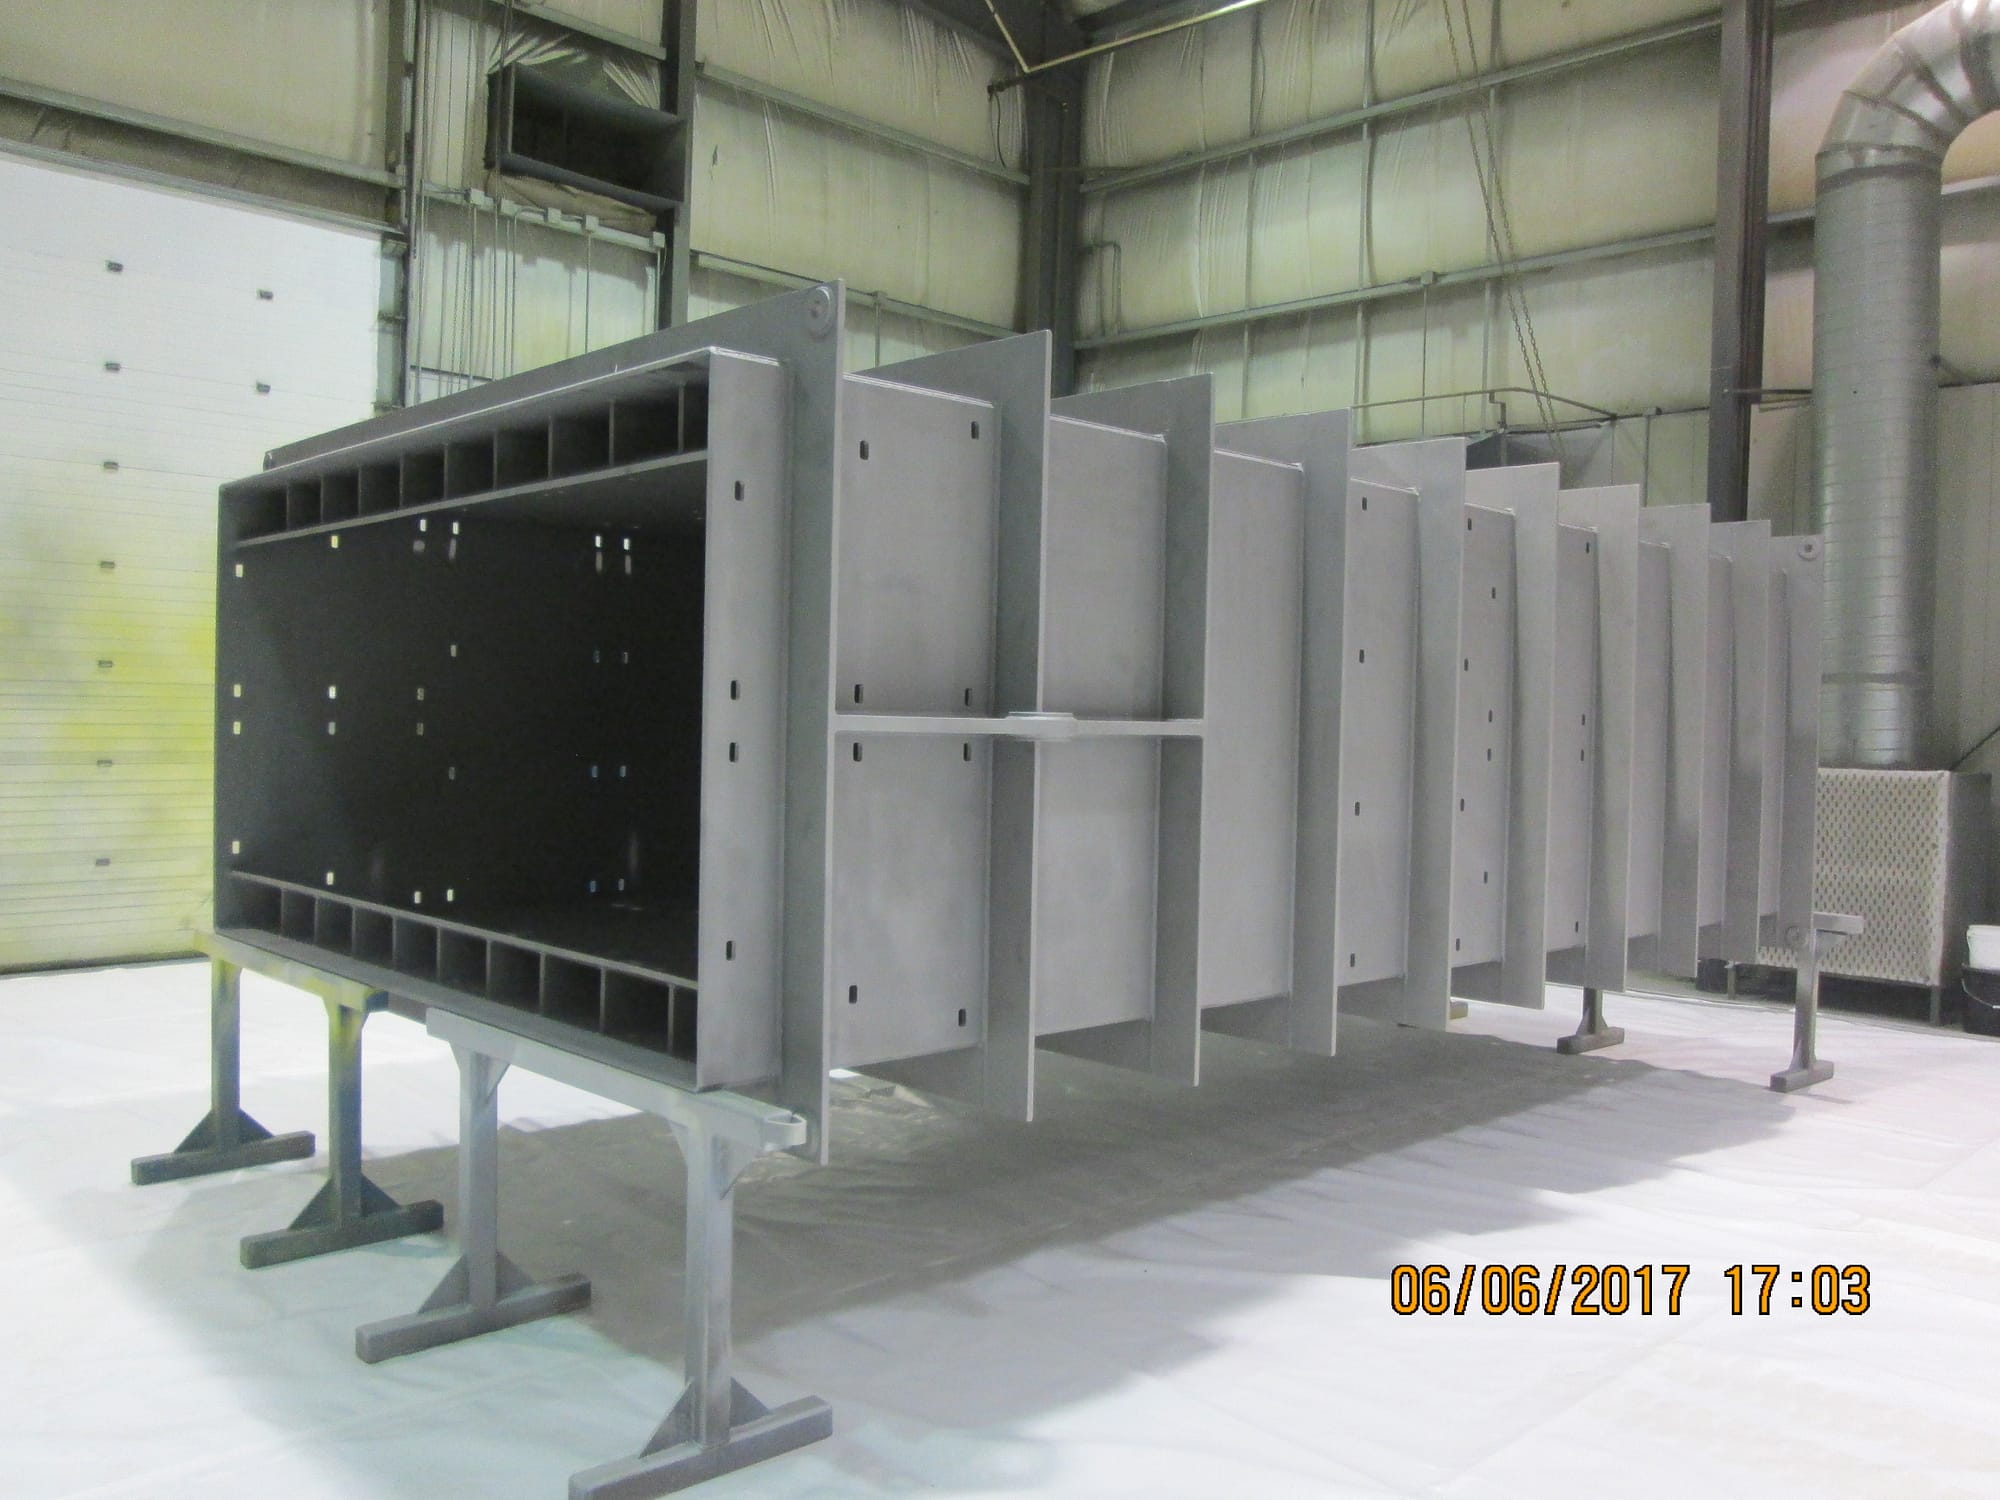 Mining Project - Structural Steel Fabrication of K3 Expansion Loading Pocket Flasks, Discharge Chutes and Diverter Gate